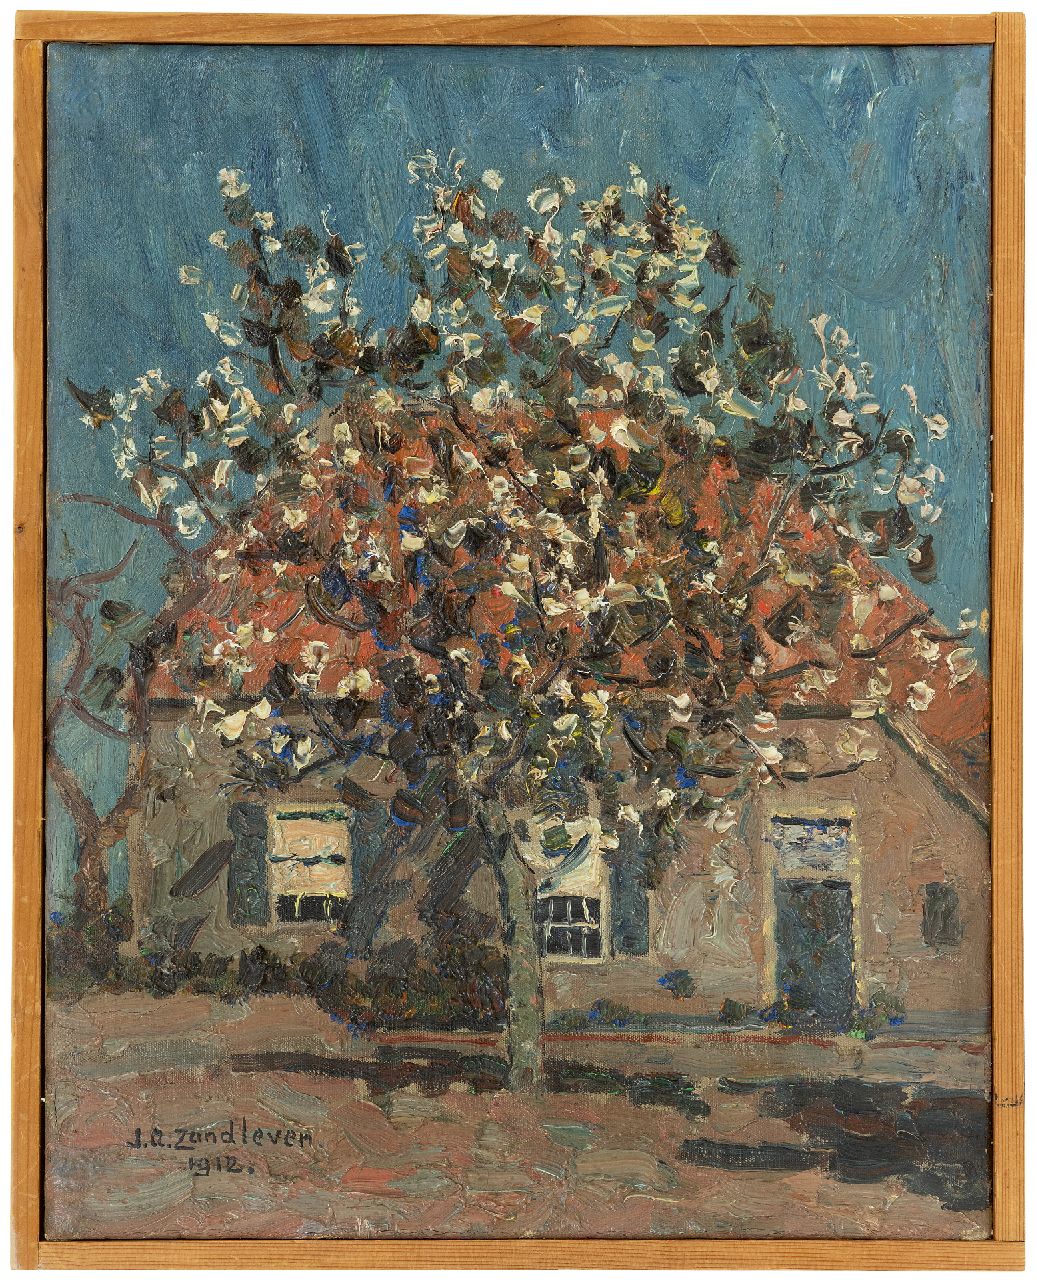 Zandleven J.A.  | Jan Adam Zandleven | Paintings offered for sale | Flowering fruit tree in front of a farm, oil on canvas laid down on panel 40.2 x 32.1 cm, signed l.l. and dated 1912